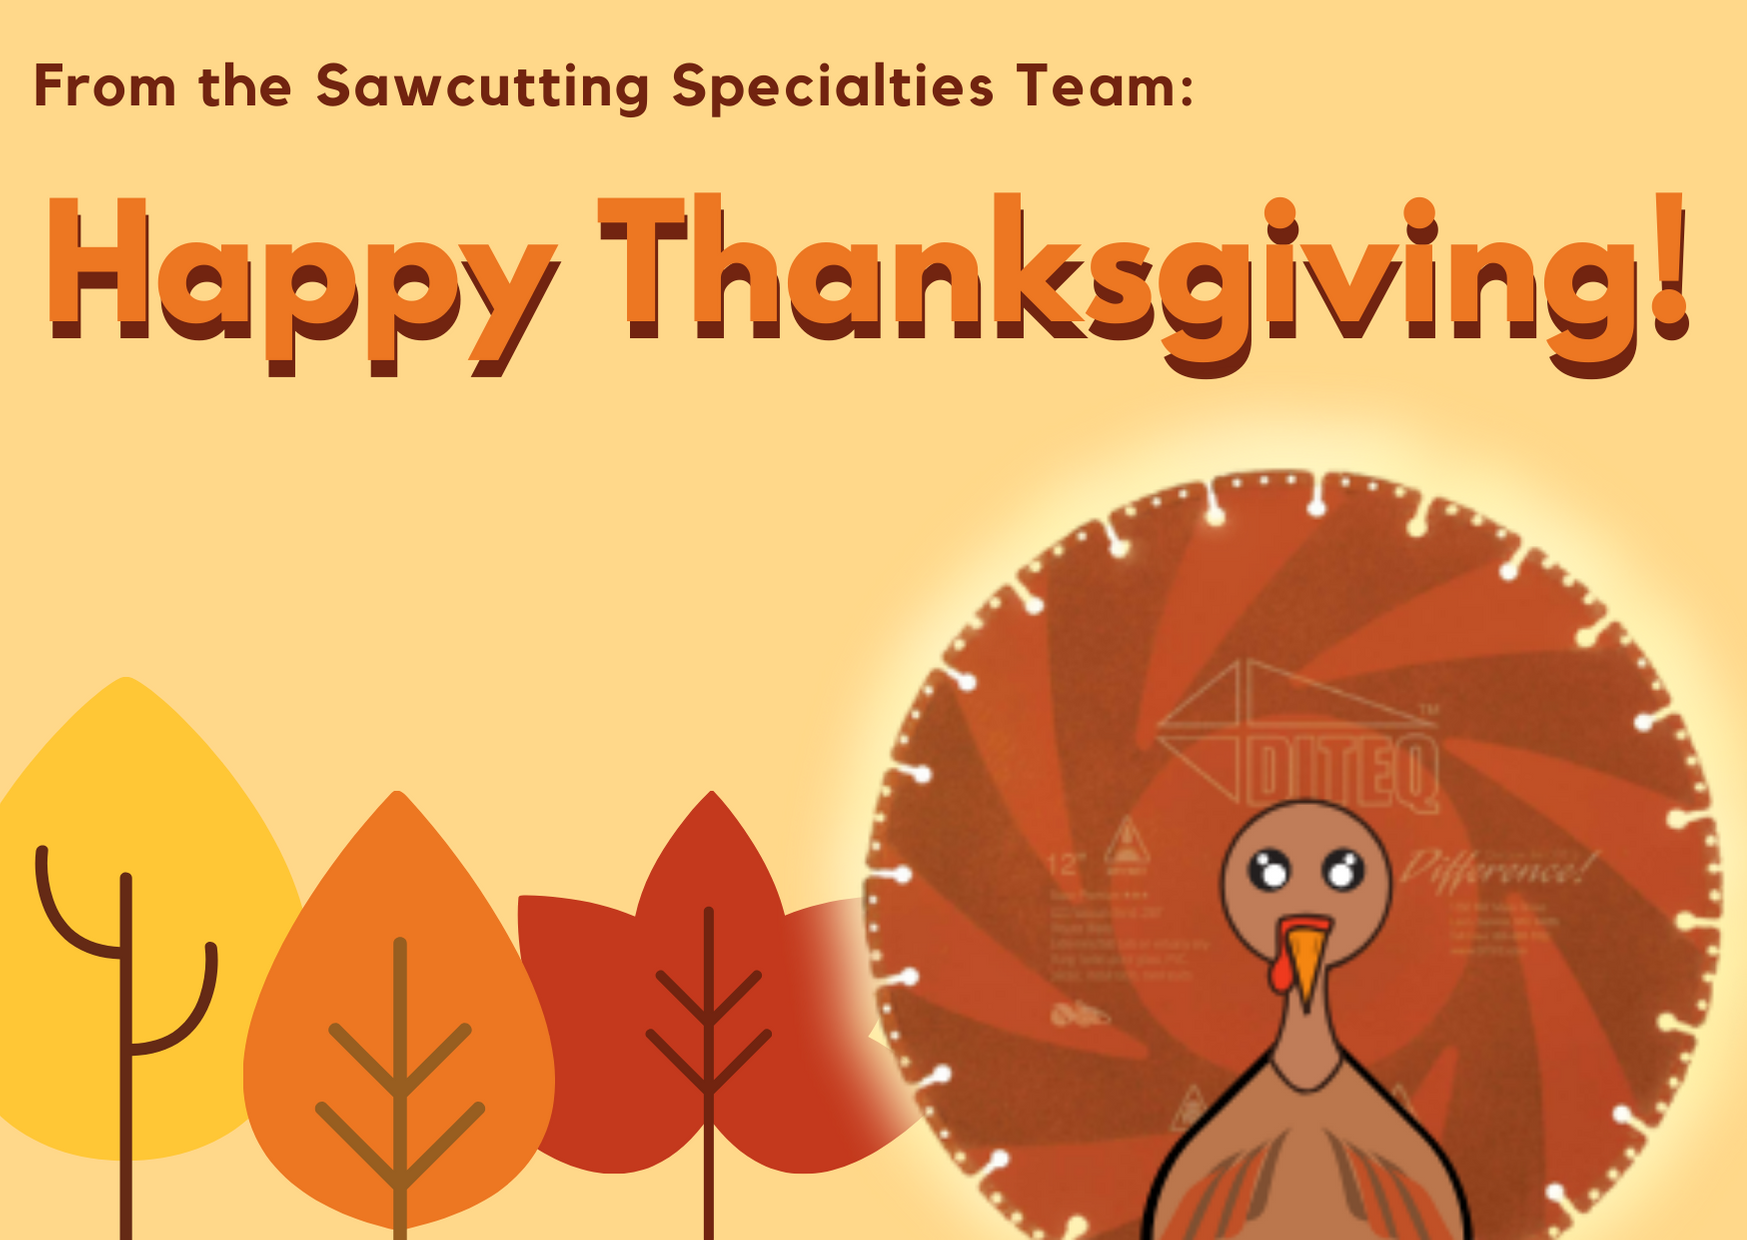 Happy Thanksgiving 2019 Sawcutting Specialties